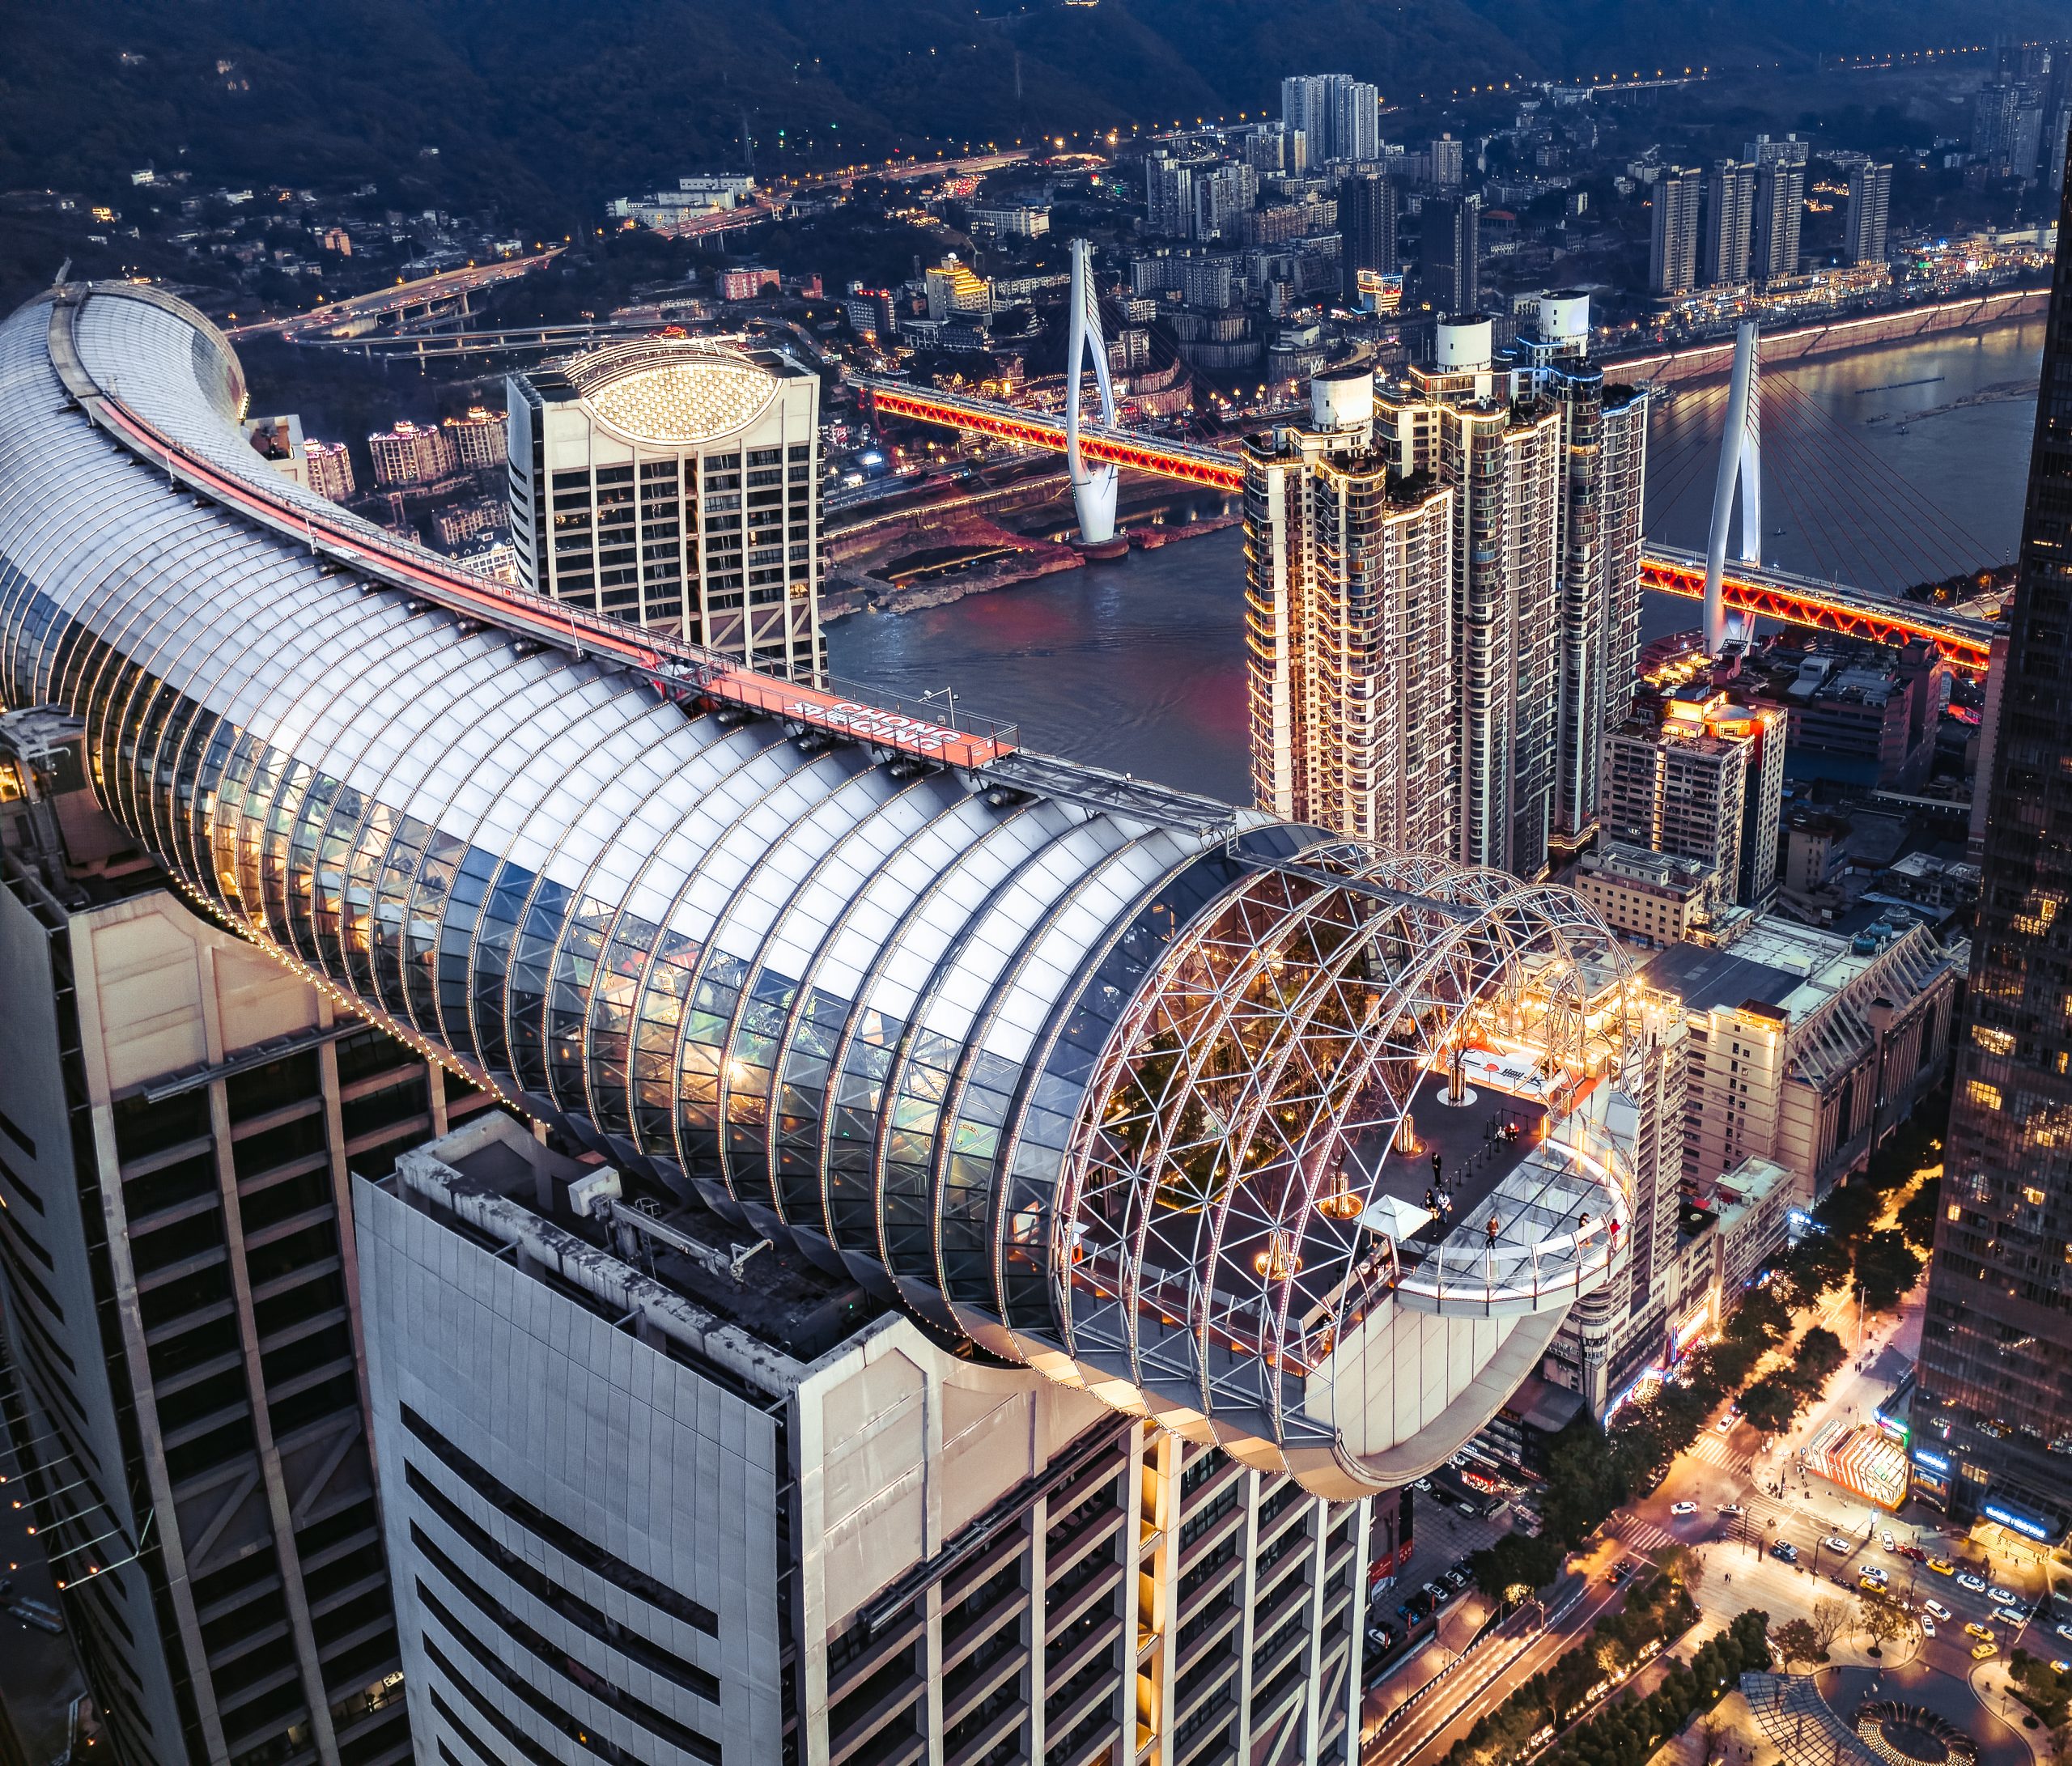 The Exploration Deck Viewing Gallery of Raffles City Chongqing Joins The World Federation Of Great Towers